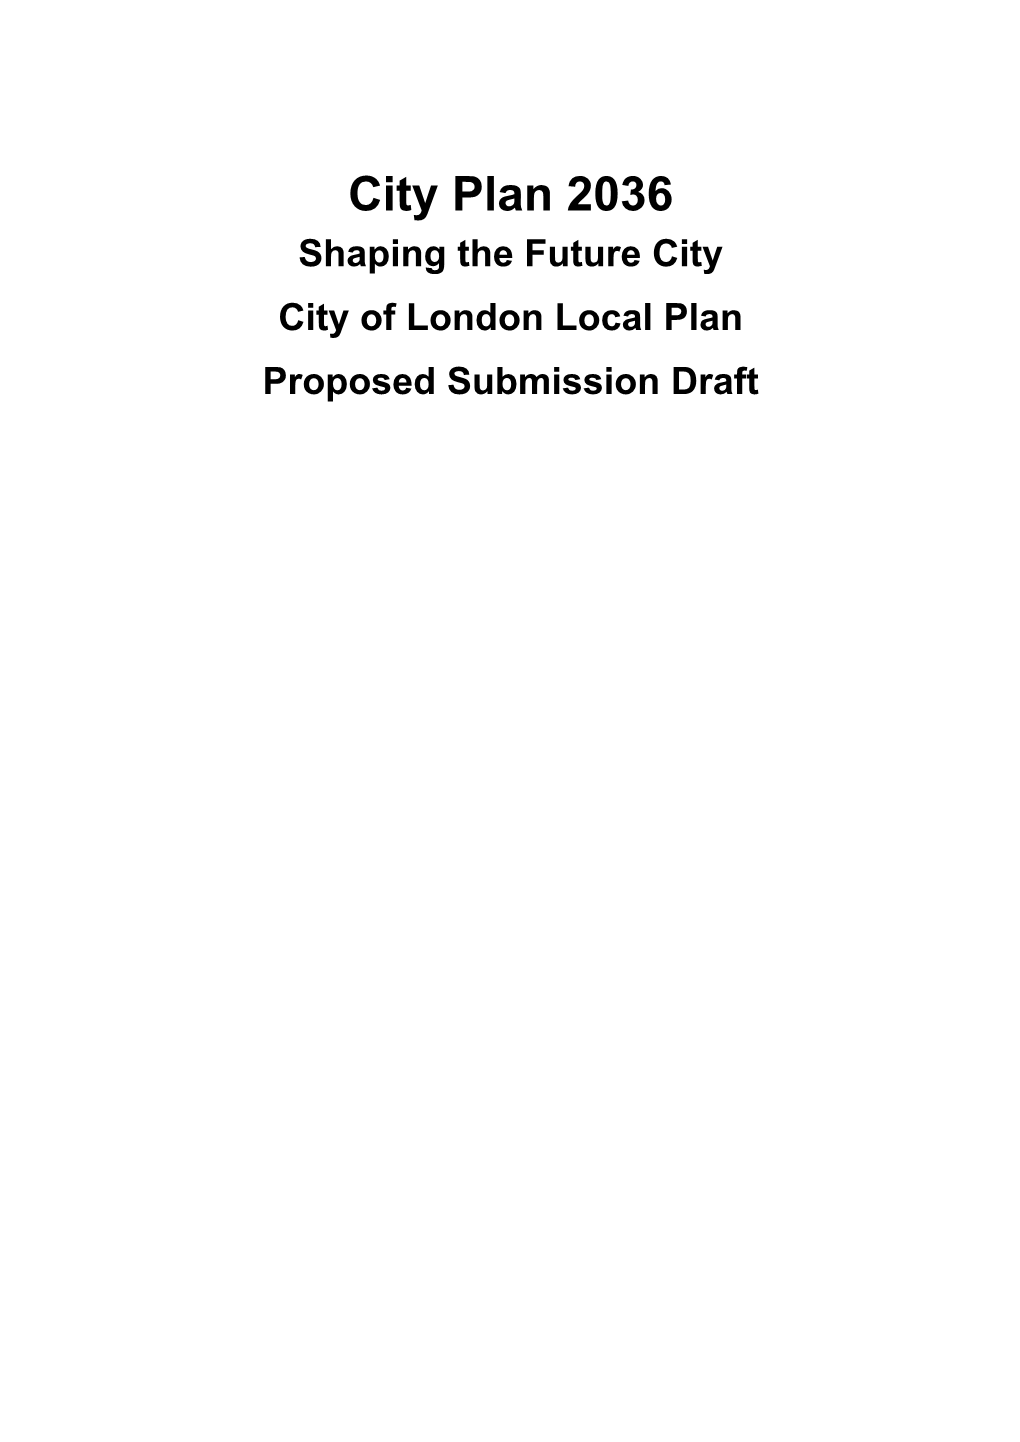 City Plan 2036 Shaping the Future City City of London Local Plan Proposed Submission Draft Foreword